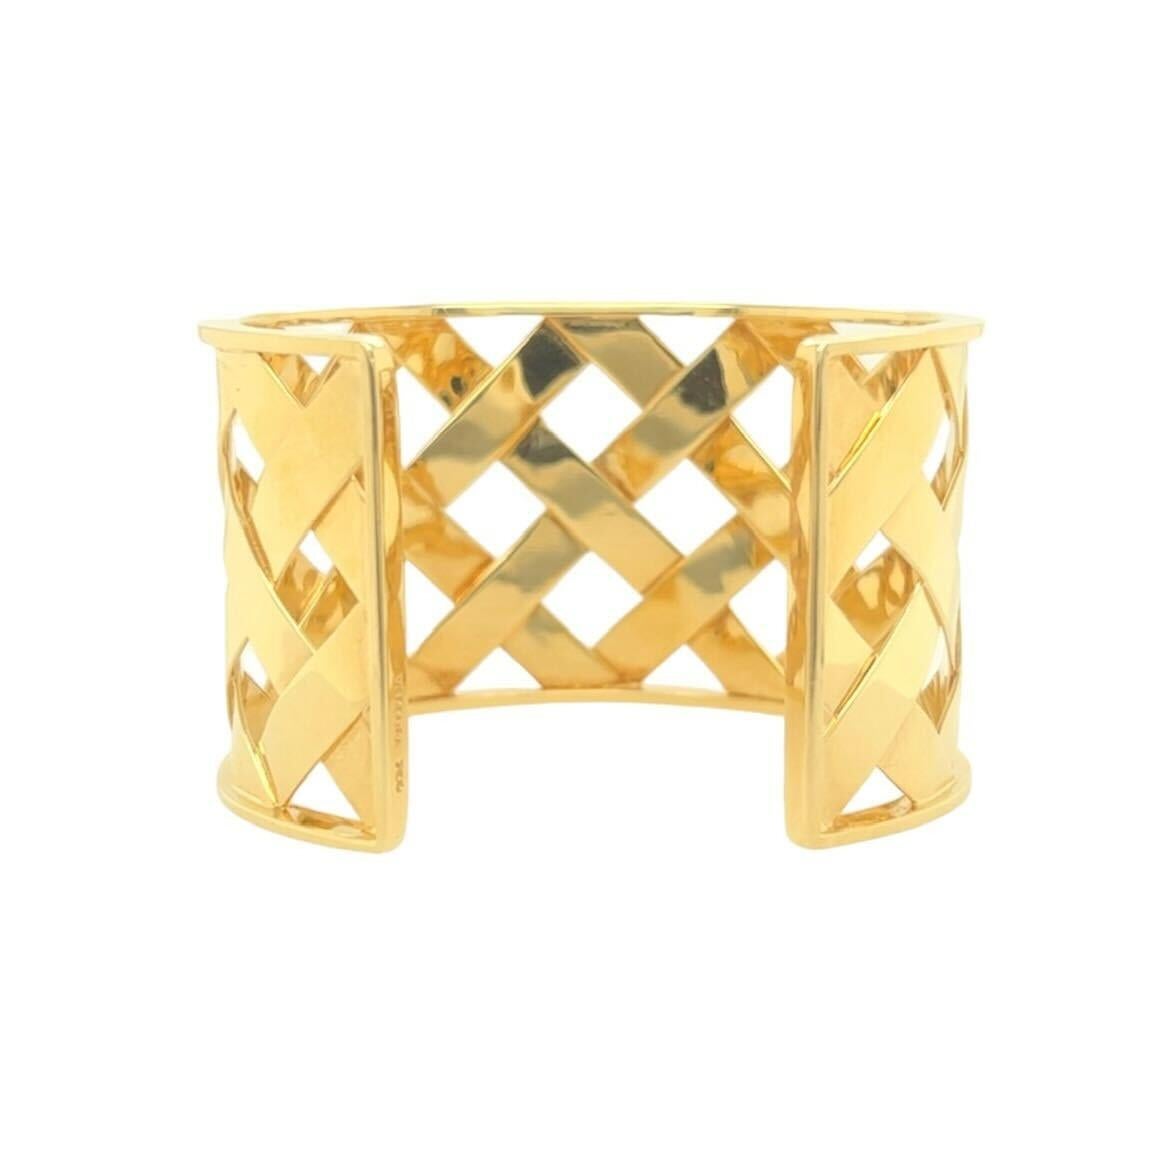 An 18 karat yellow gold bracelet, Verdura.  The “Criss Cross” cuff designed as a wide, open backed cuff of lattice woven gold.  Inner circumference approximately 6 1/4 inches.  Gross weight approximately 66.30 grams.  Signed Verdura and hand